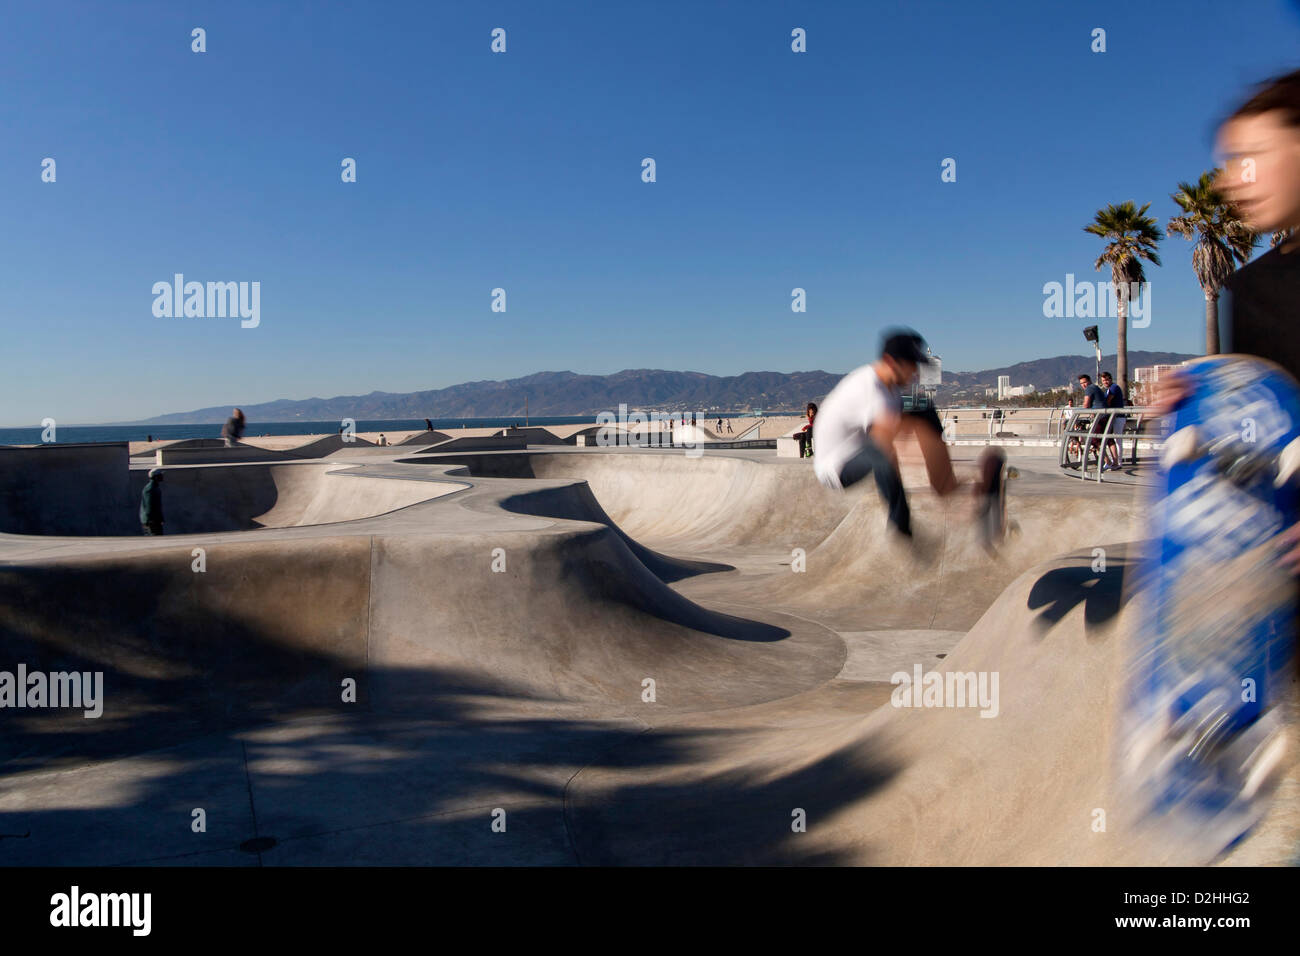 Skater at the skate park in Venice Beach, Los Angeles, California, United States of America, USA Stock Photo